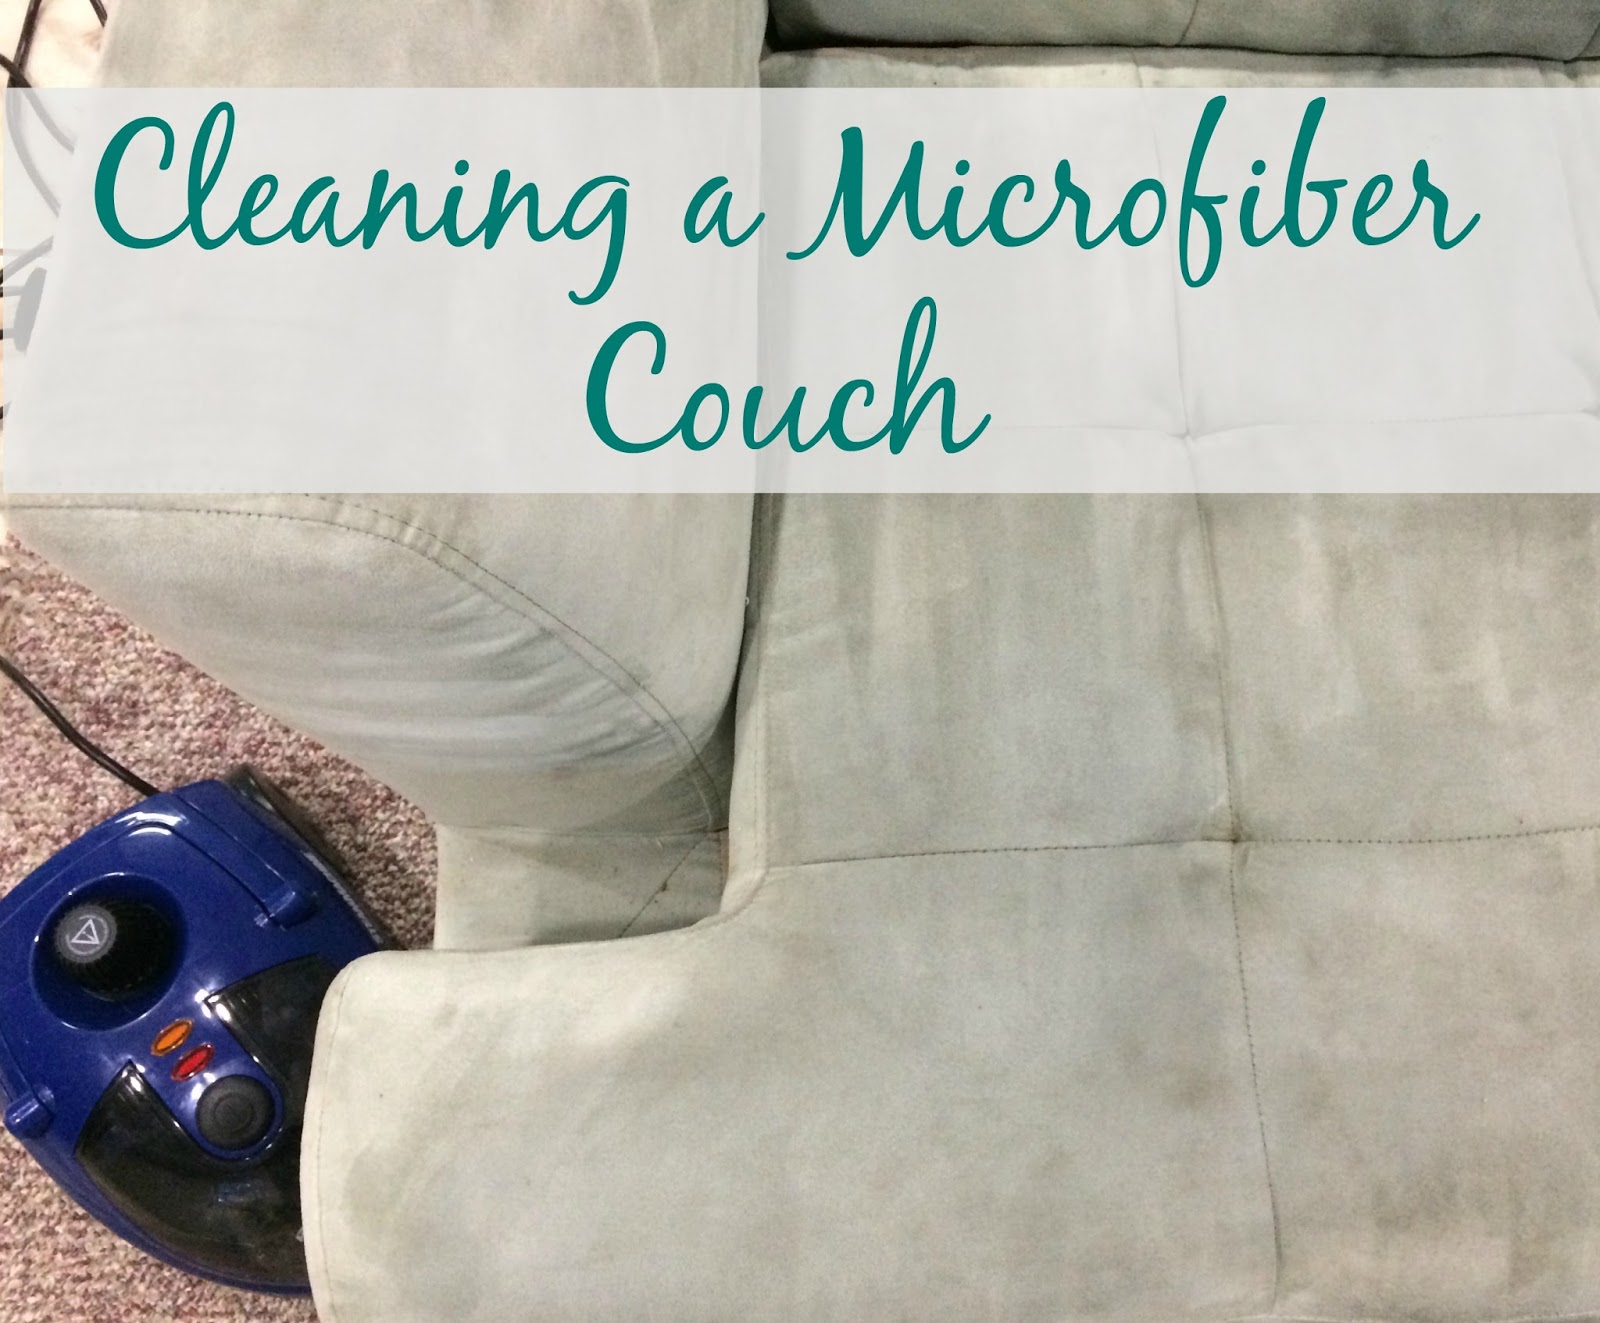 Microfiber Couch Cleaning with Rubbing Alcohol